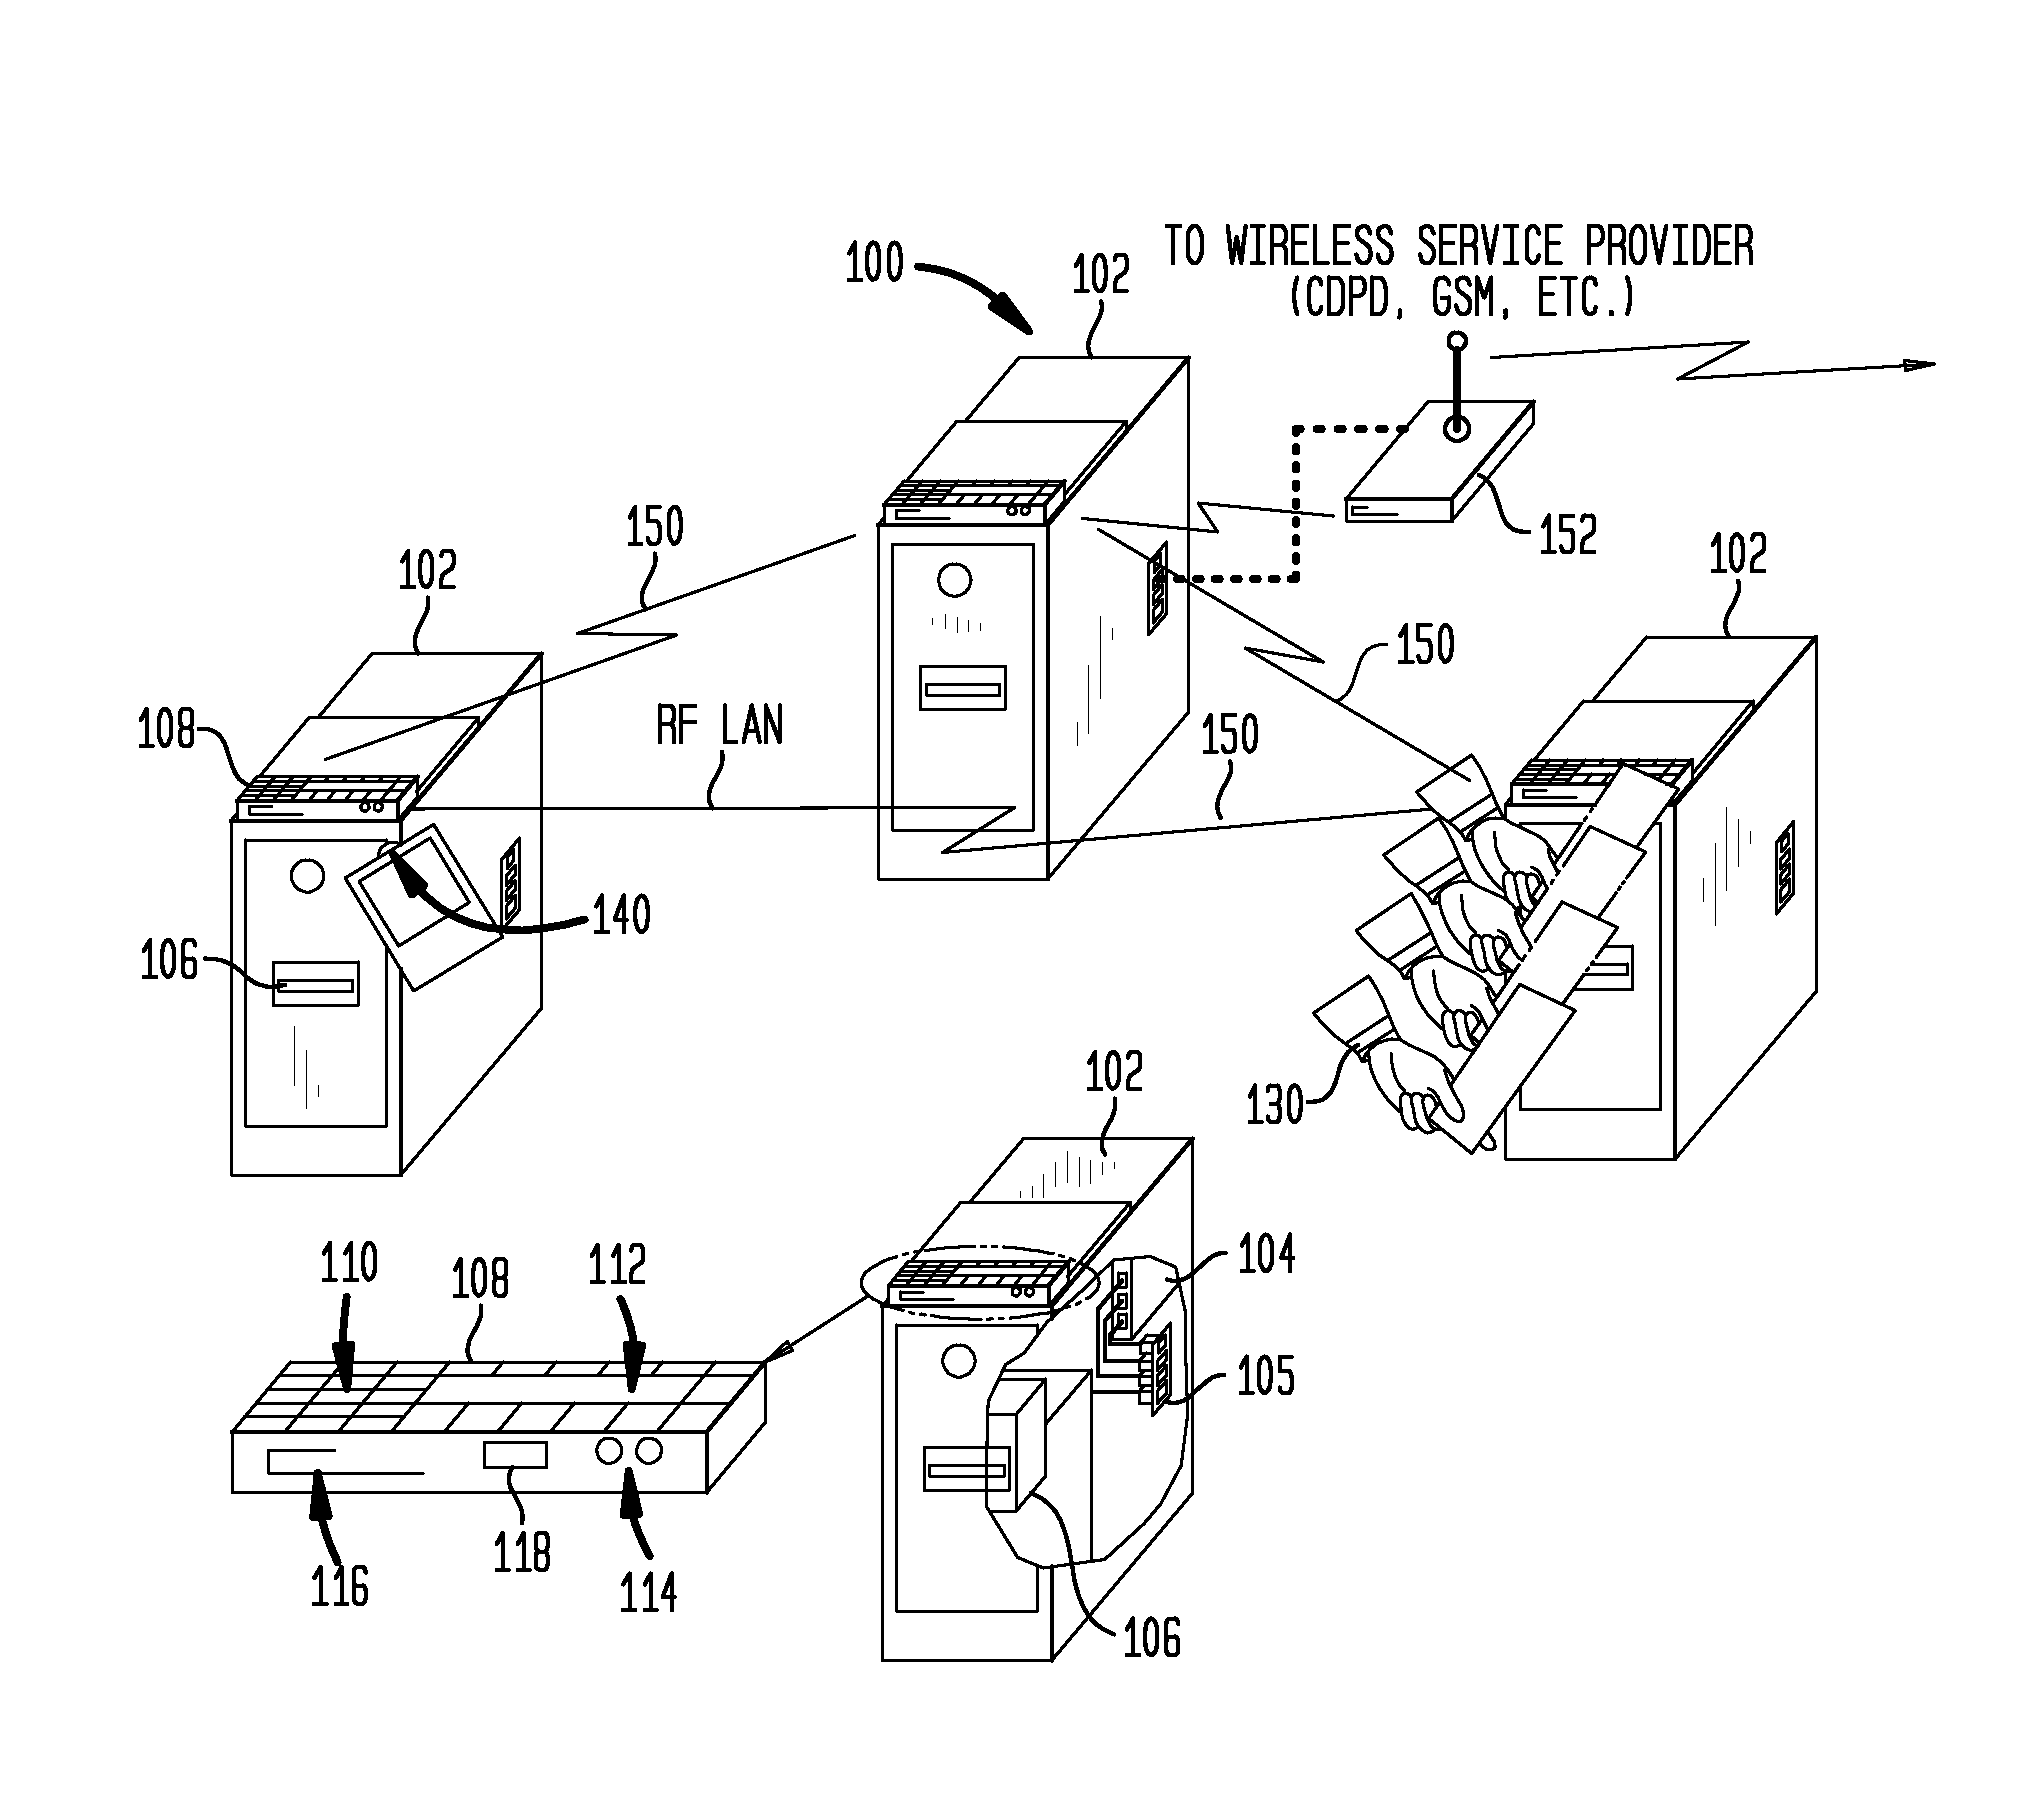 Methods and apparauts for an electronic drop safe